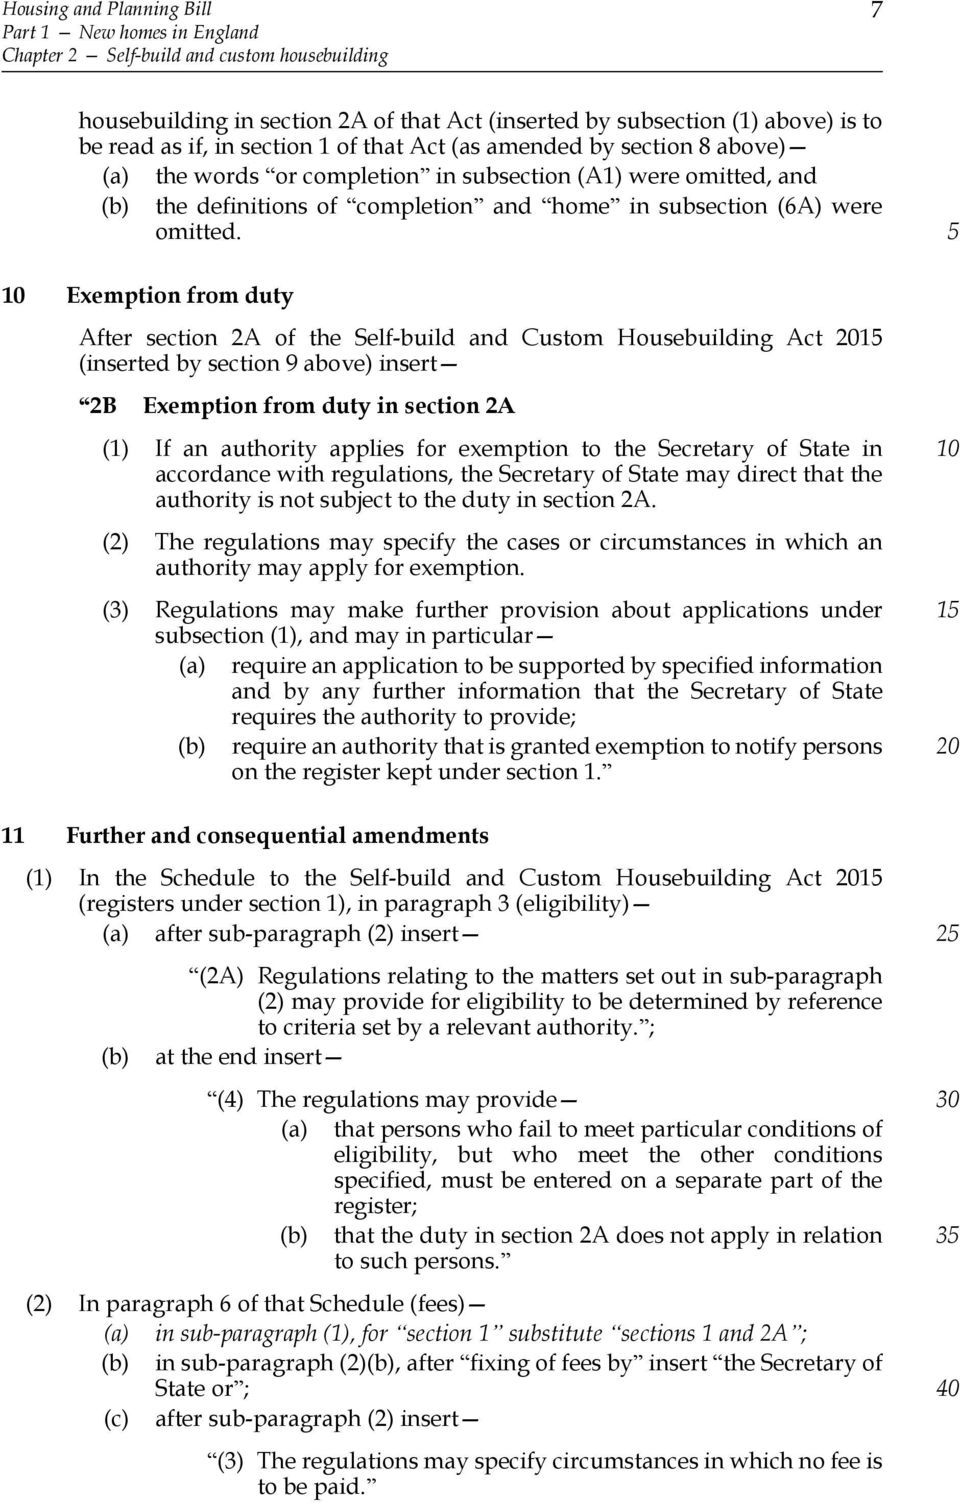 Exemption from duty After section 2A of the Self-build and Custom Housebuilding Act 1 (inserted by section 9 above) insert 2B Exemption from duty in section 2A (1) If an authority applies for